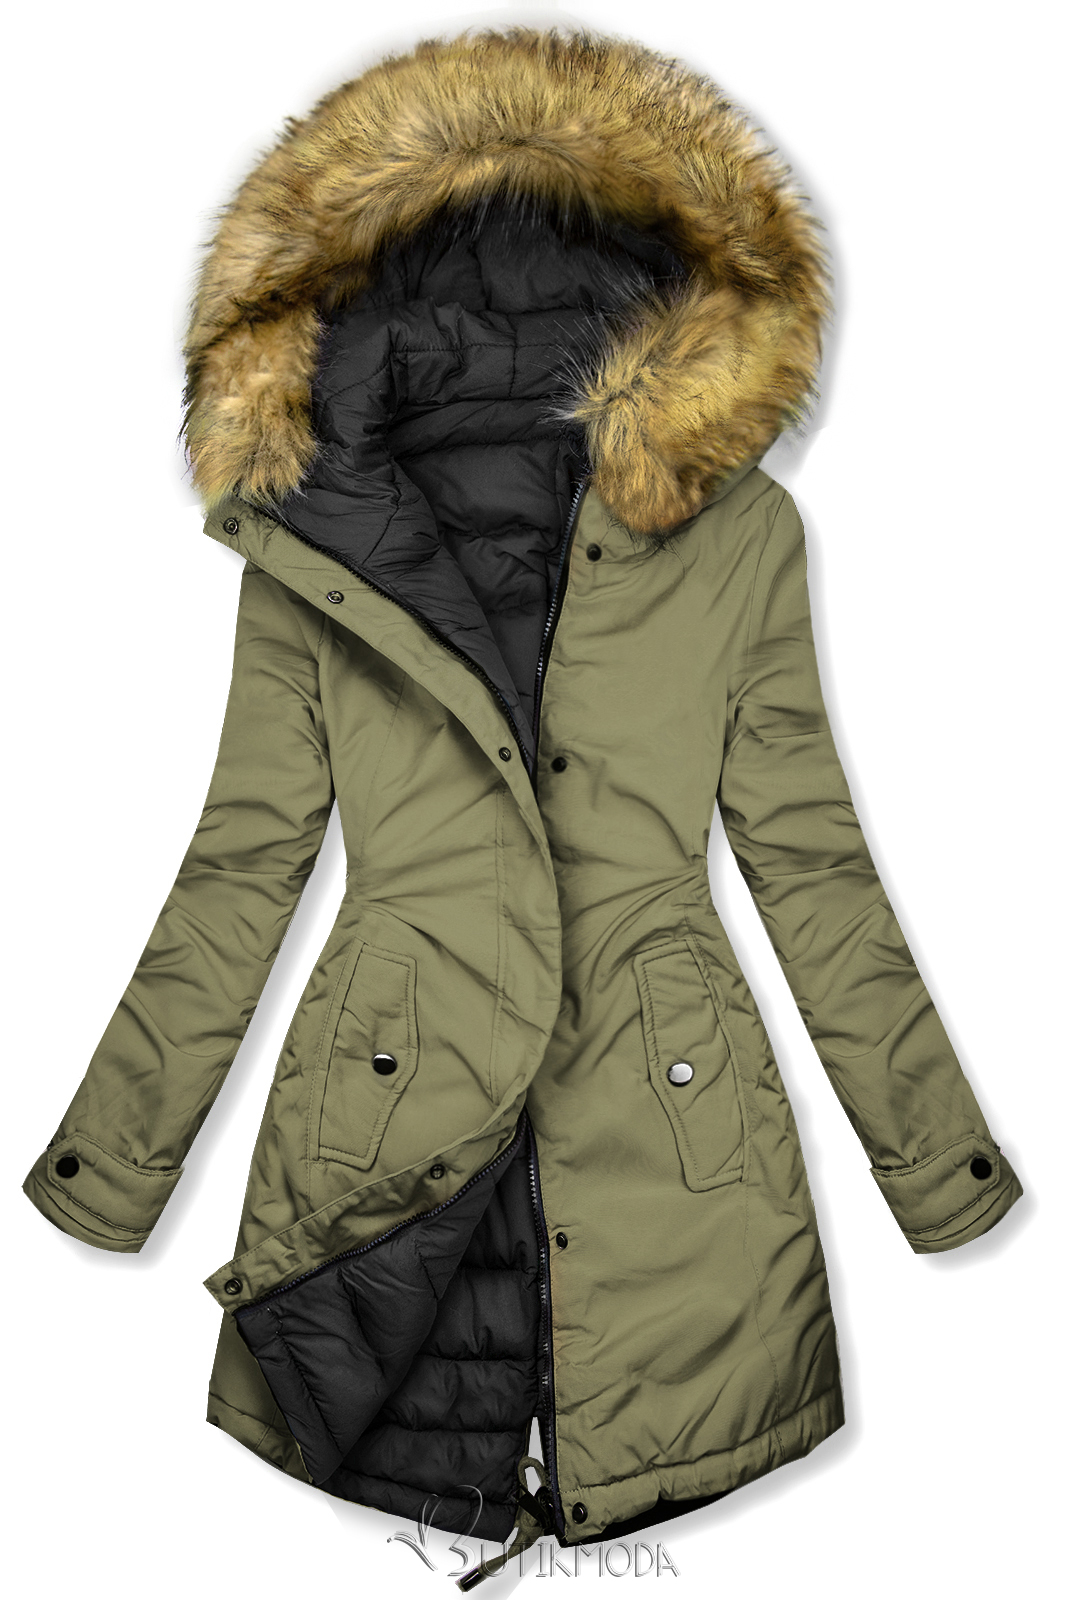 Reversible winter jacket with olive/black faux fur